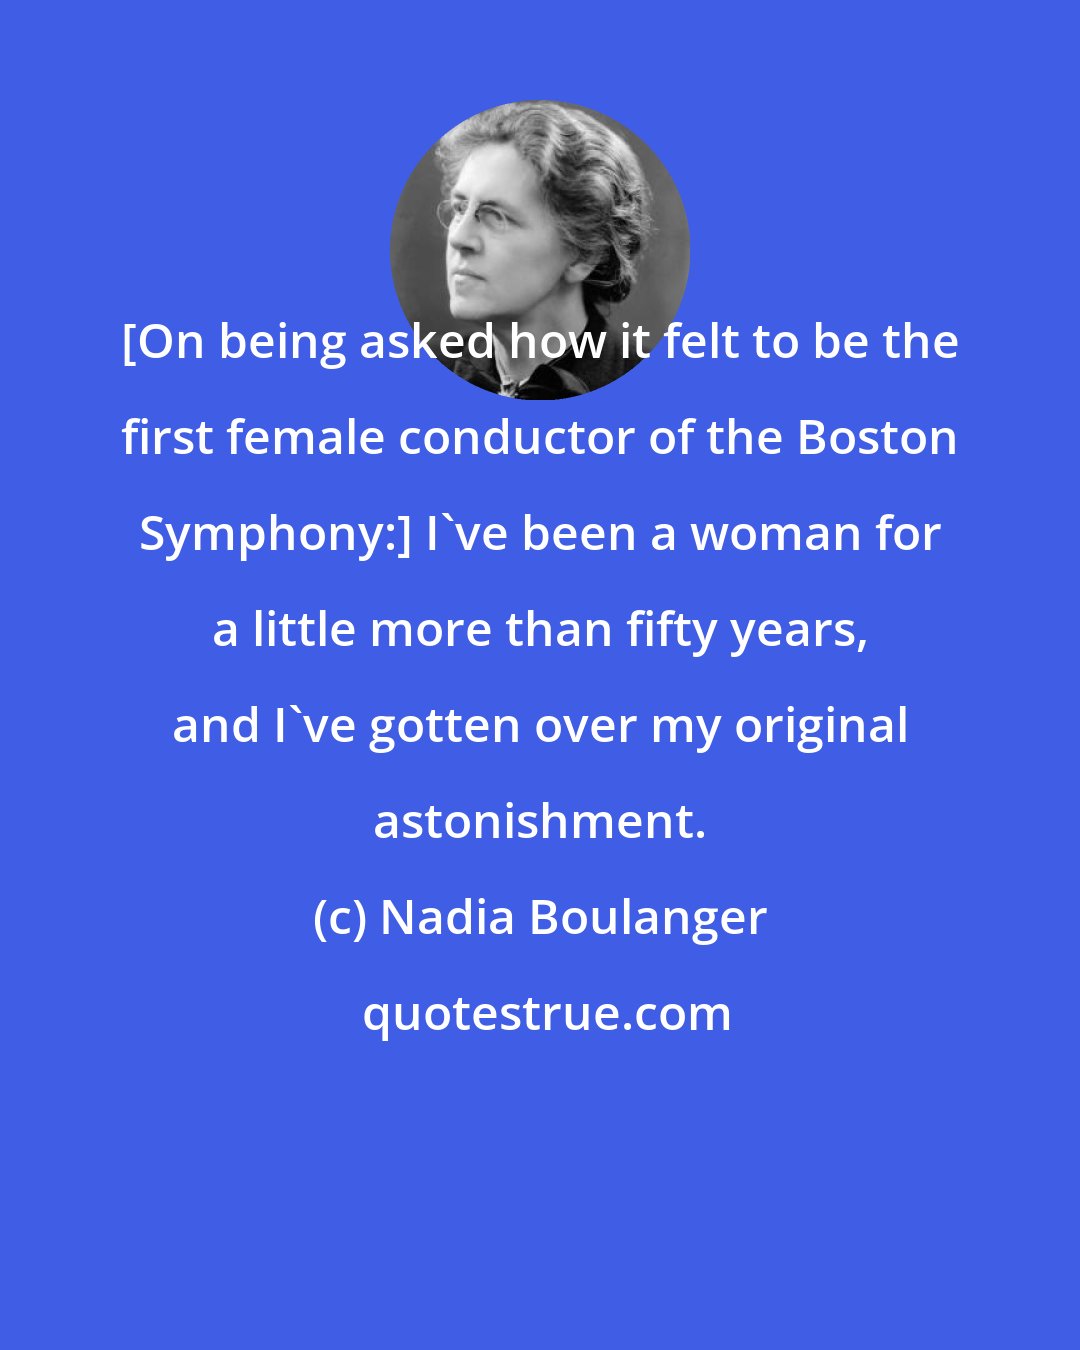 Nadia Boulanger: [On being asked how it felt to be the first female conductor of the Boston Symphony:] I've been a woman for a little more than fifty years, and I've gotten over my original astonishment.